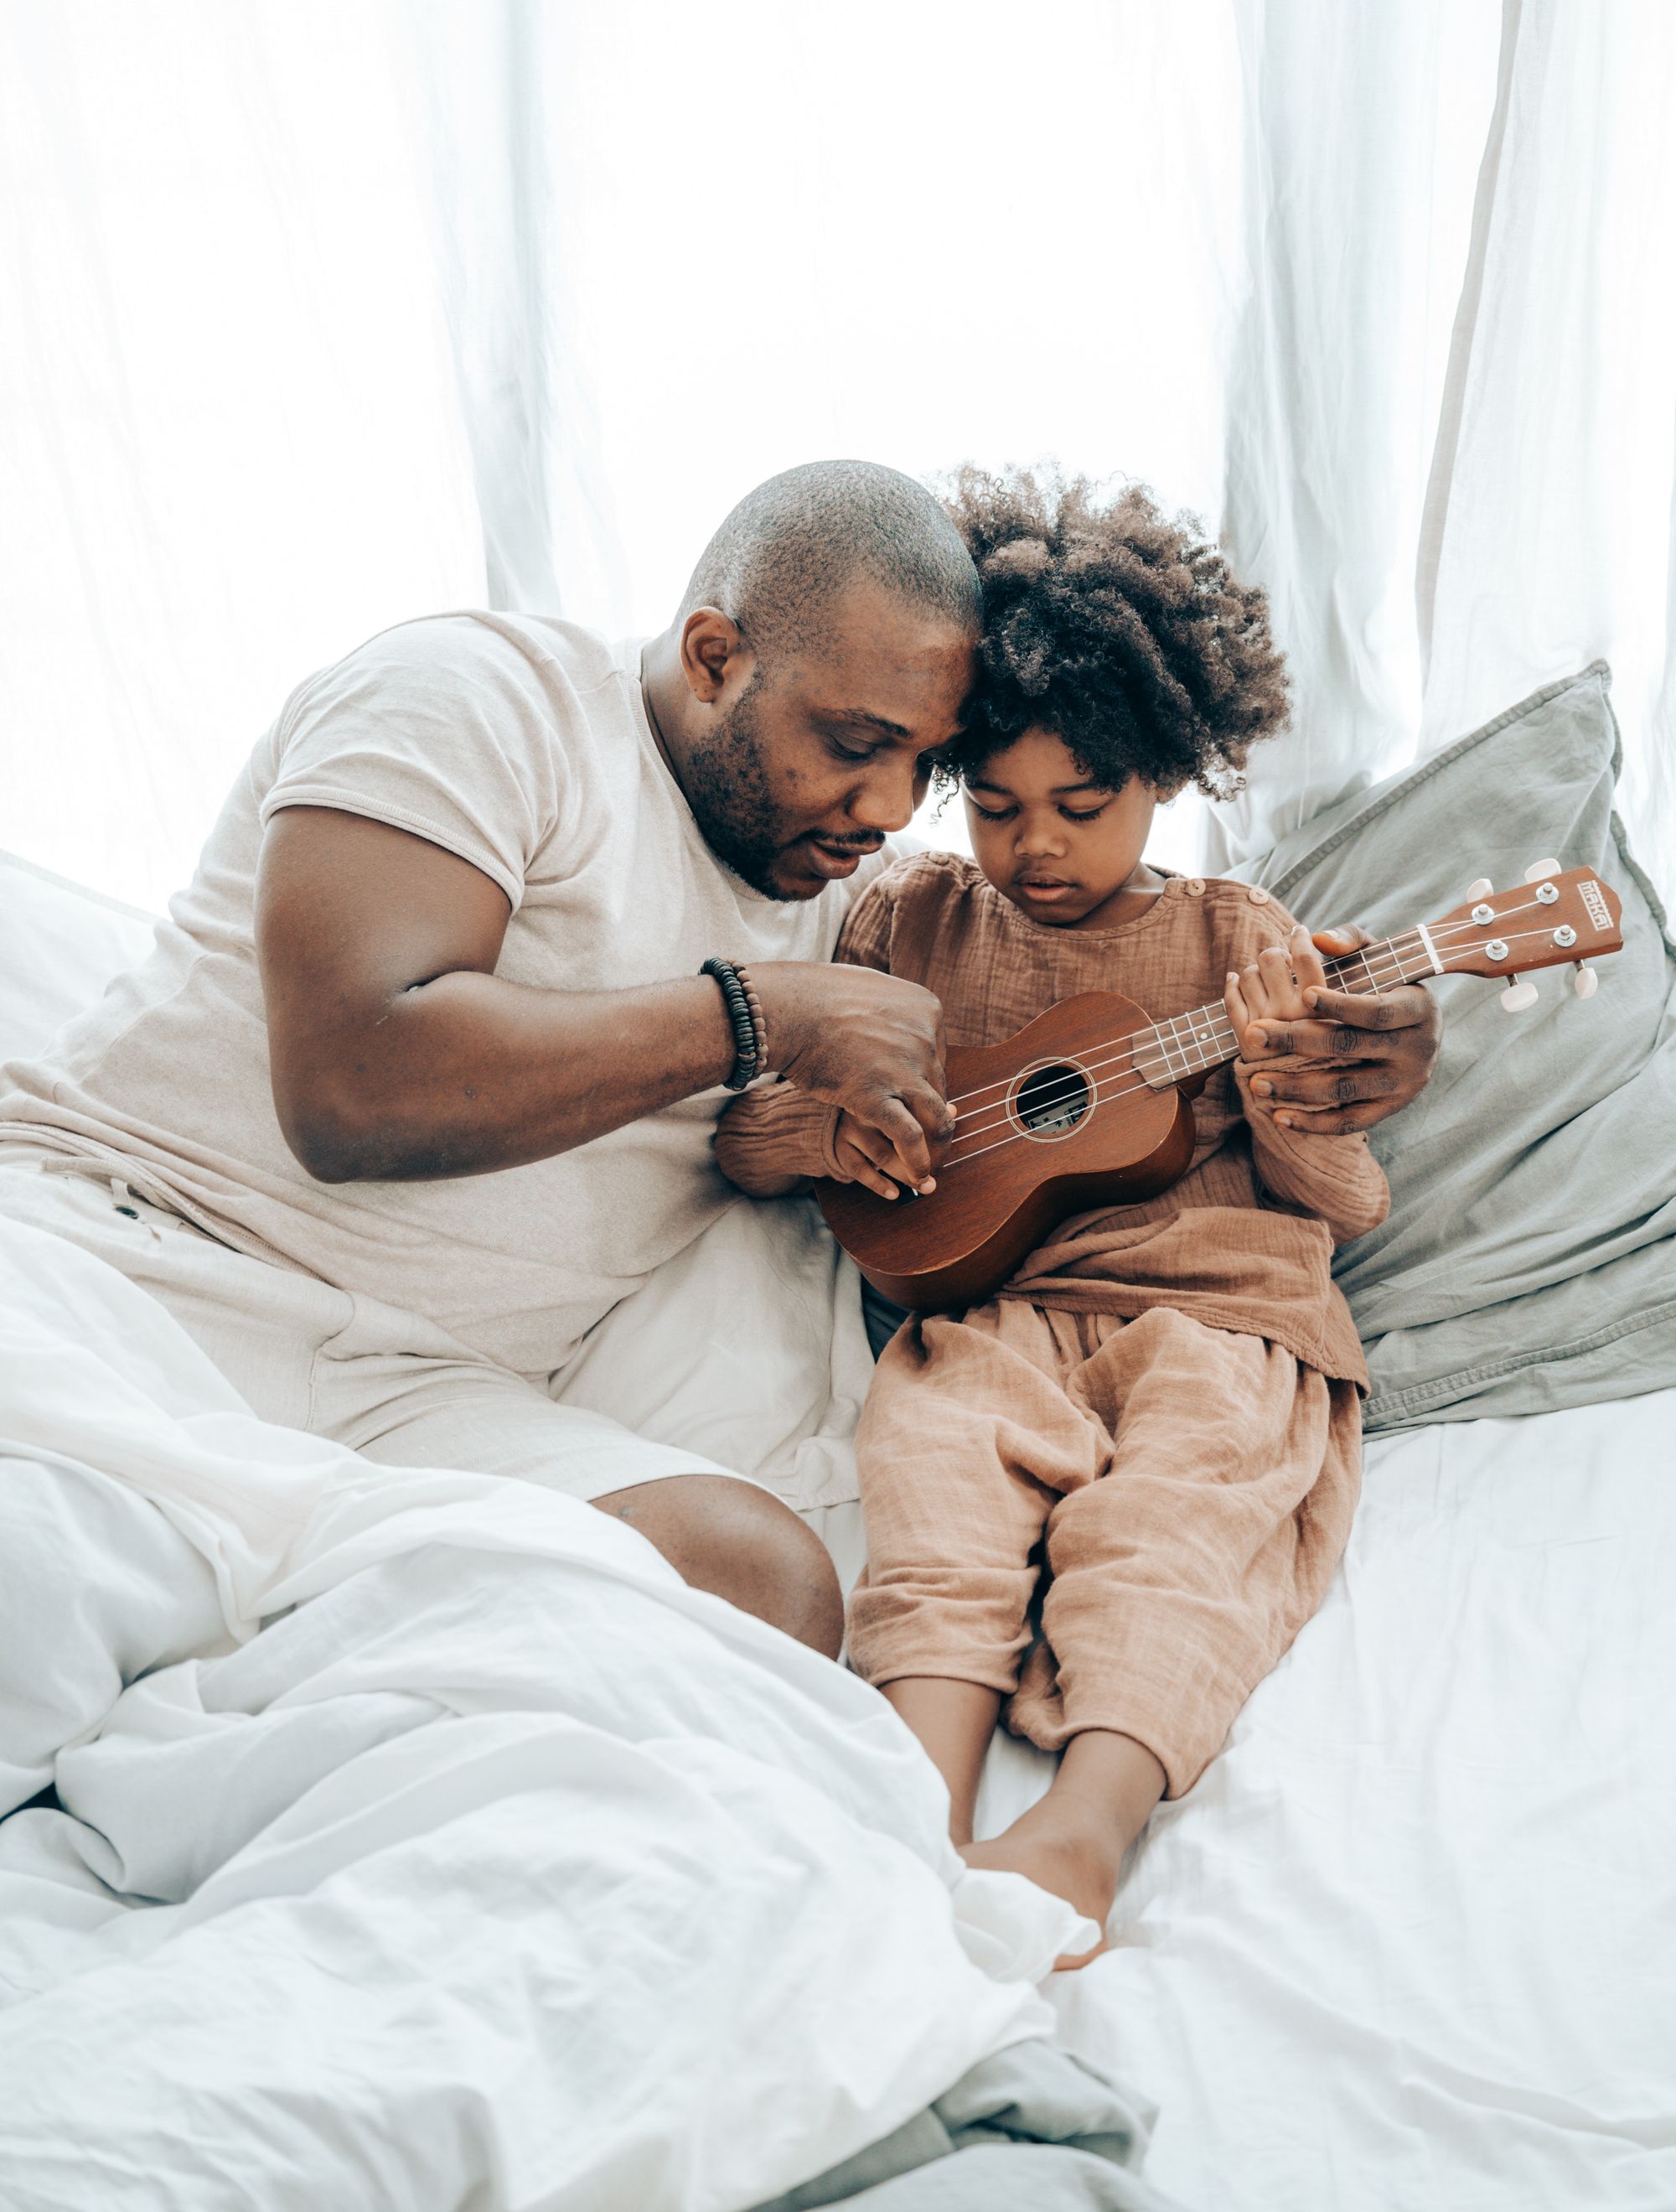 Parental Involvement in Their Kids' Online Music Lessons